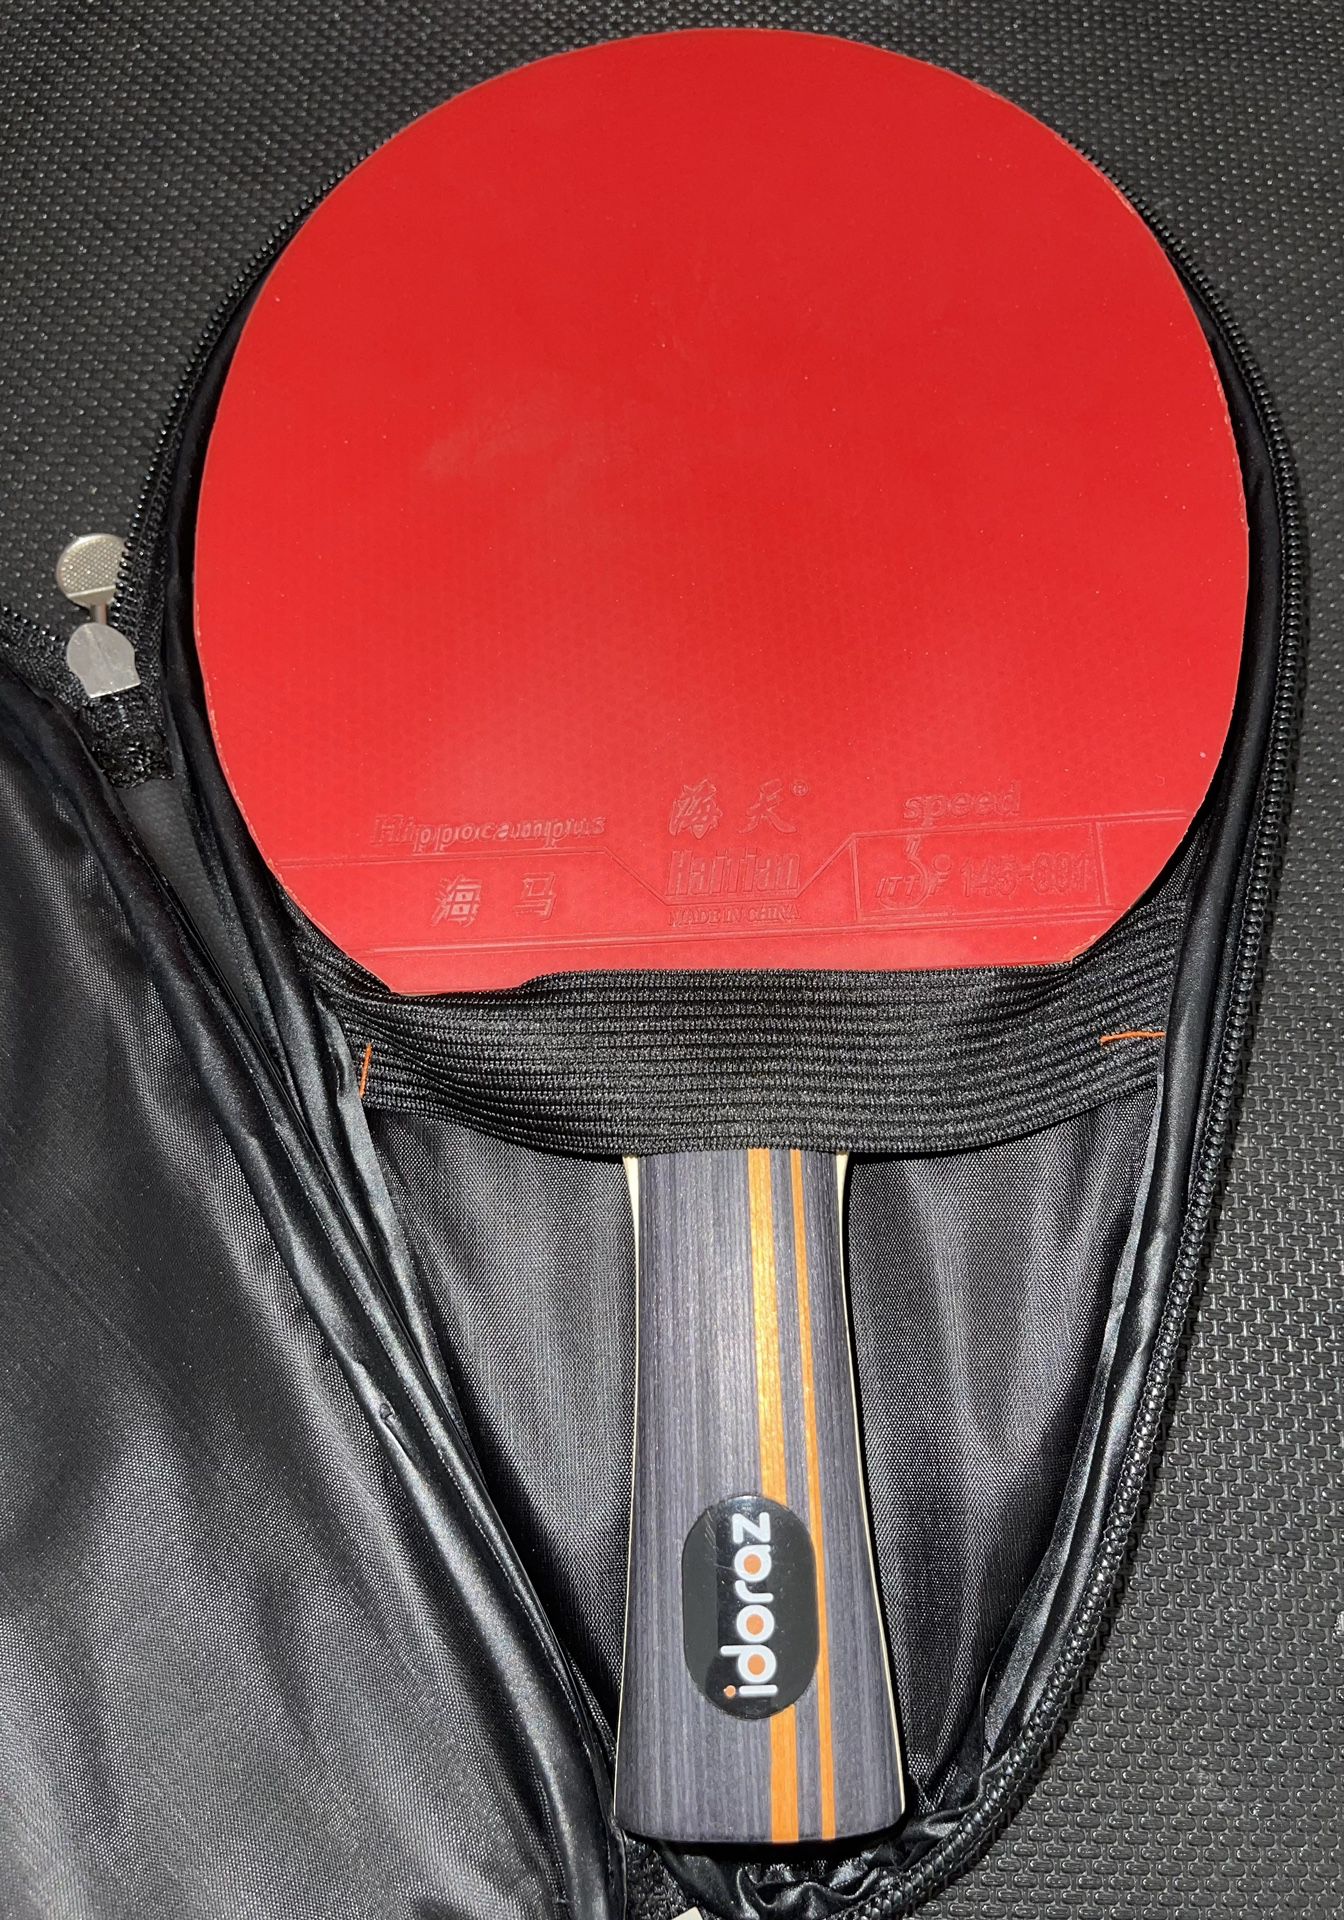 Idoraz Table Tennis Paddle Professional Ping Pong Racket with Carrying Case.